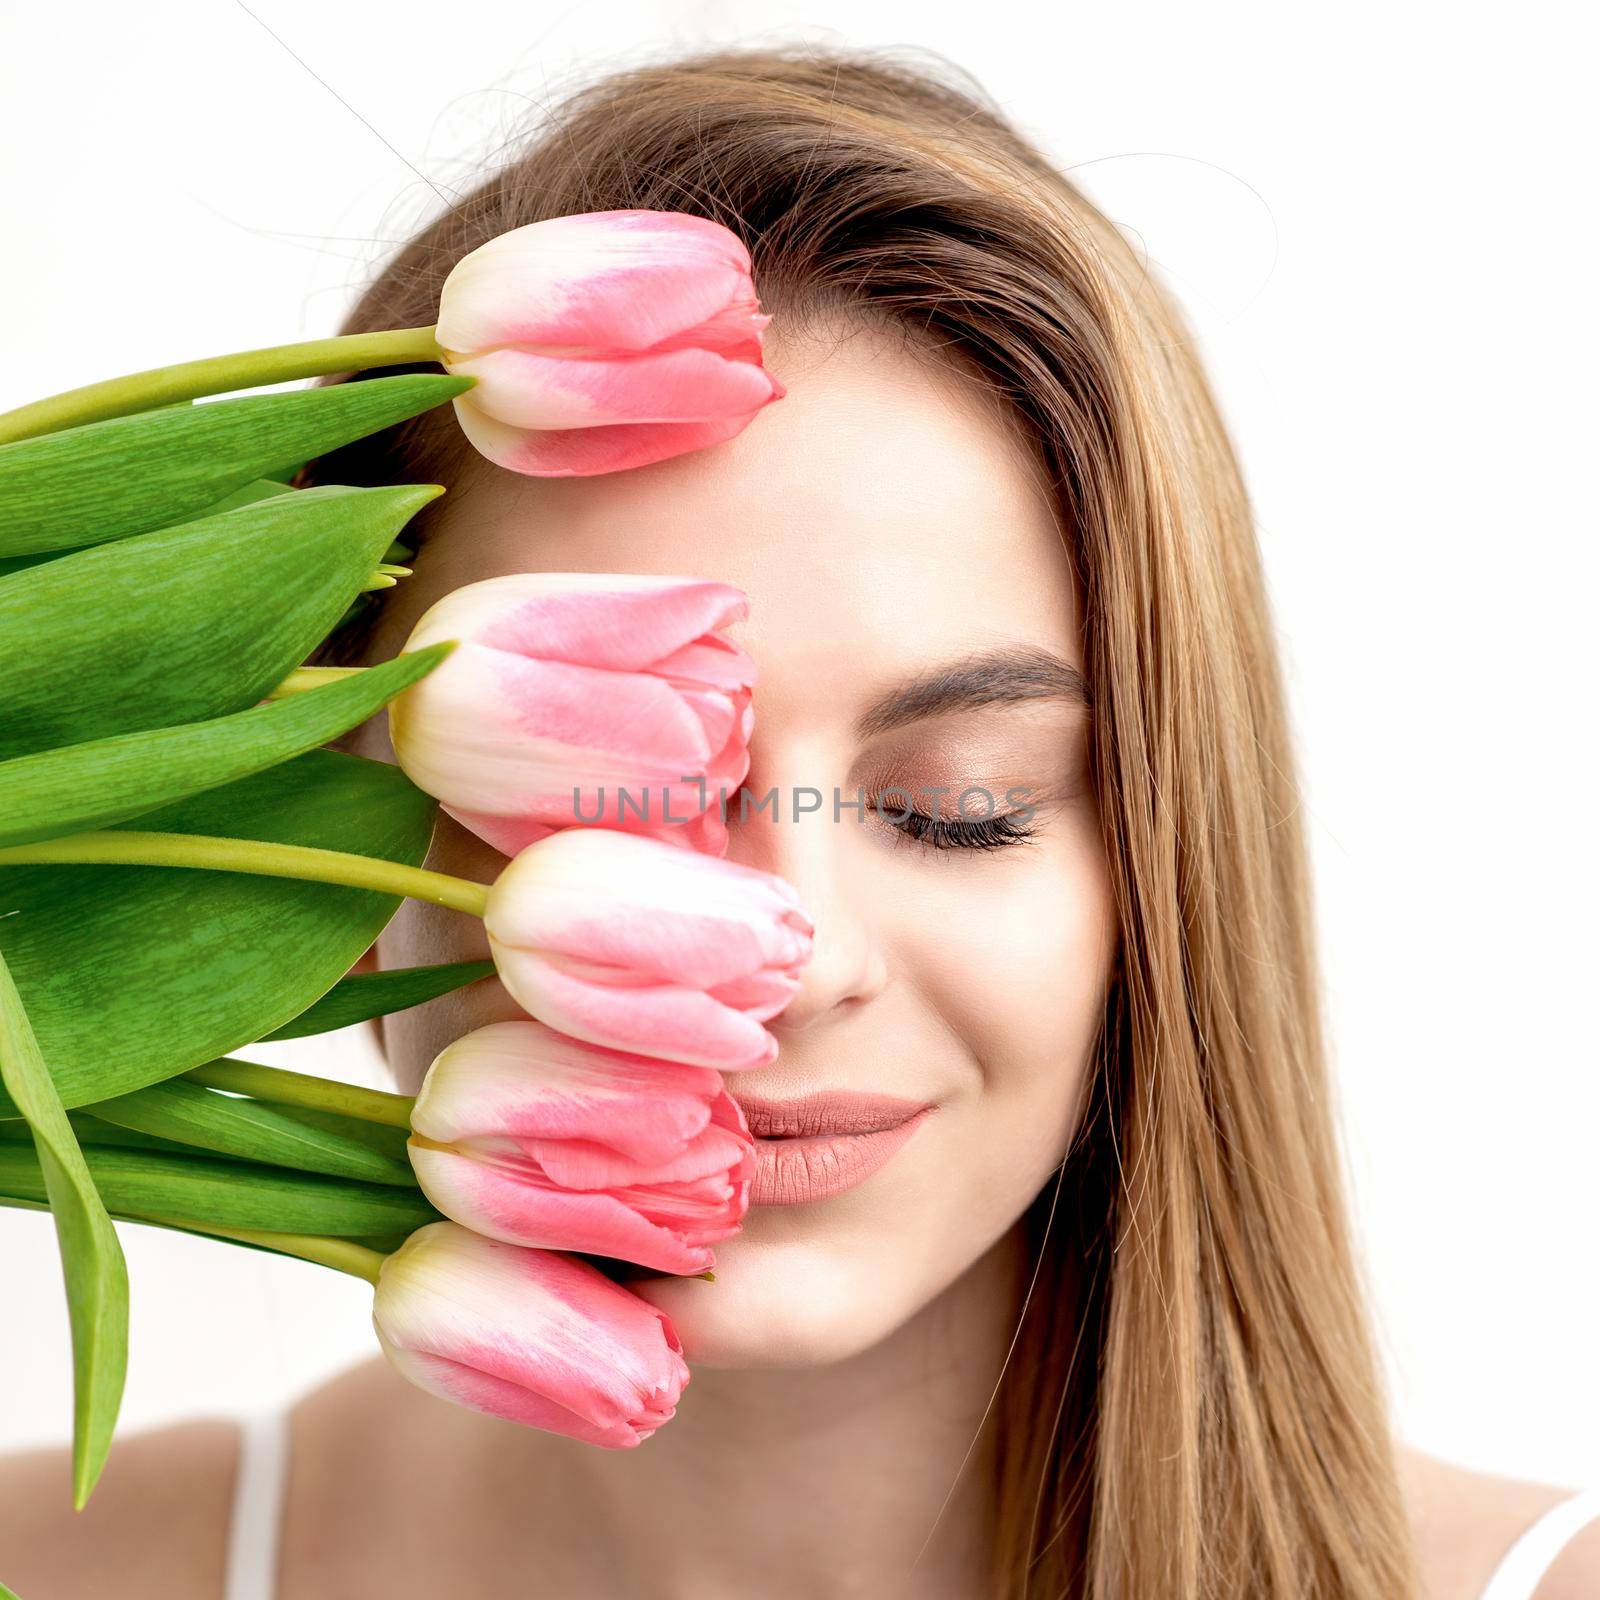 A portrait of a happy young caucasian woman with closed eyes and pink tulips cover her face against a white background